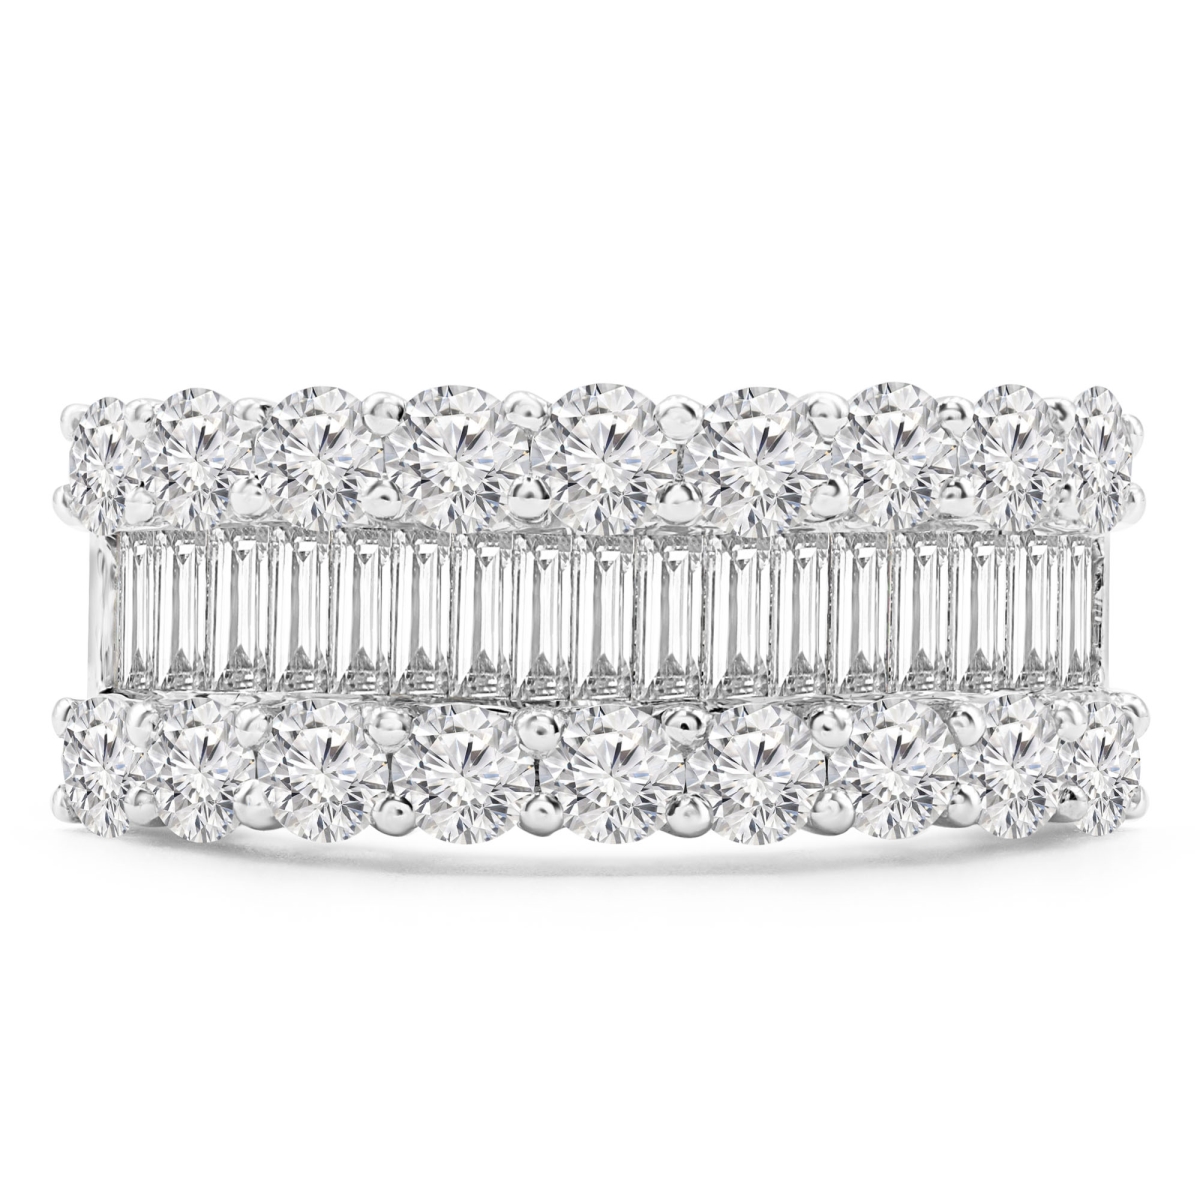 Picture of Majesty Diamonds MD210001-3 2.1 CTW Baguette Diamond Three-Row Cocktail Ring in 18K White Gold - Size 3